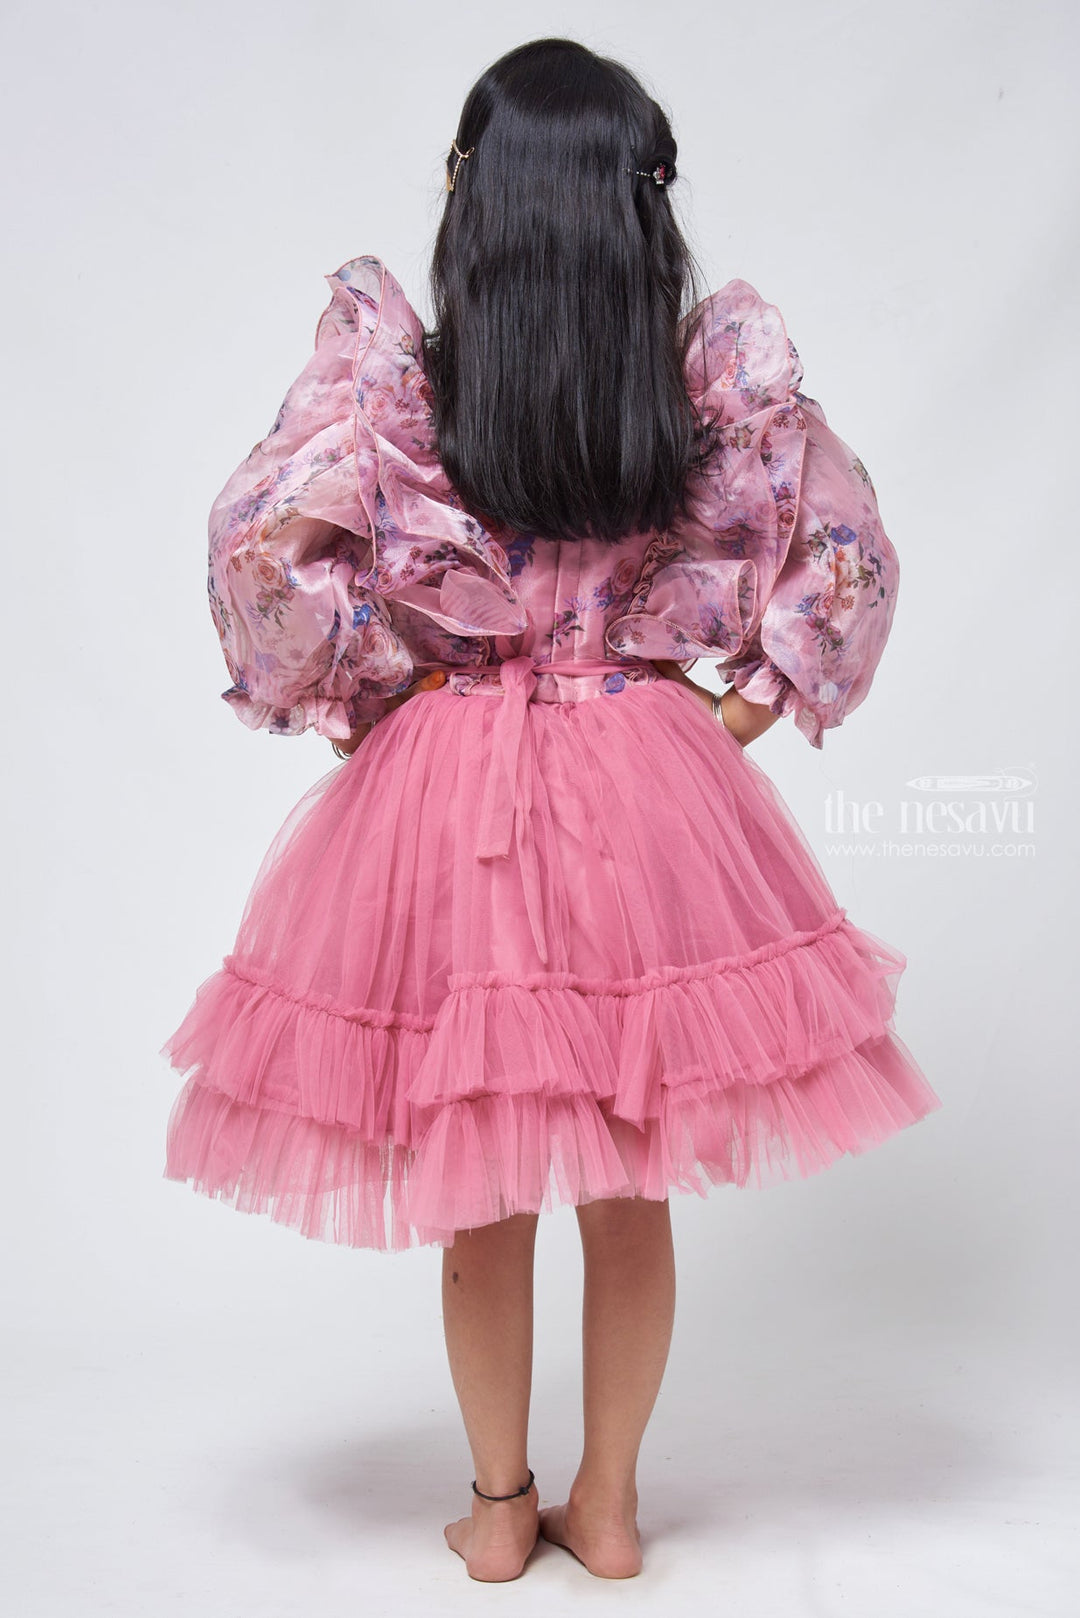 The Nesavu Girls Tutu Frock Girls Chic Frock Perfect for Special Occasions and Celebrations Nesavu Fancy Dress For 3 Years Birthday | Party Dresses For Little Girls | The Nesavu